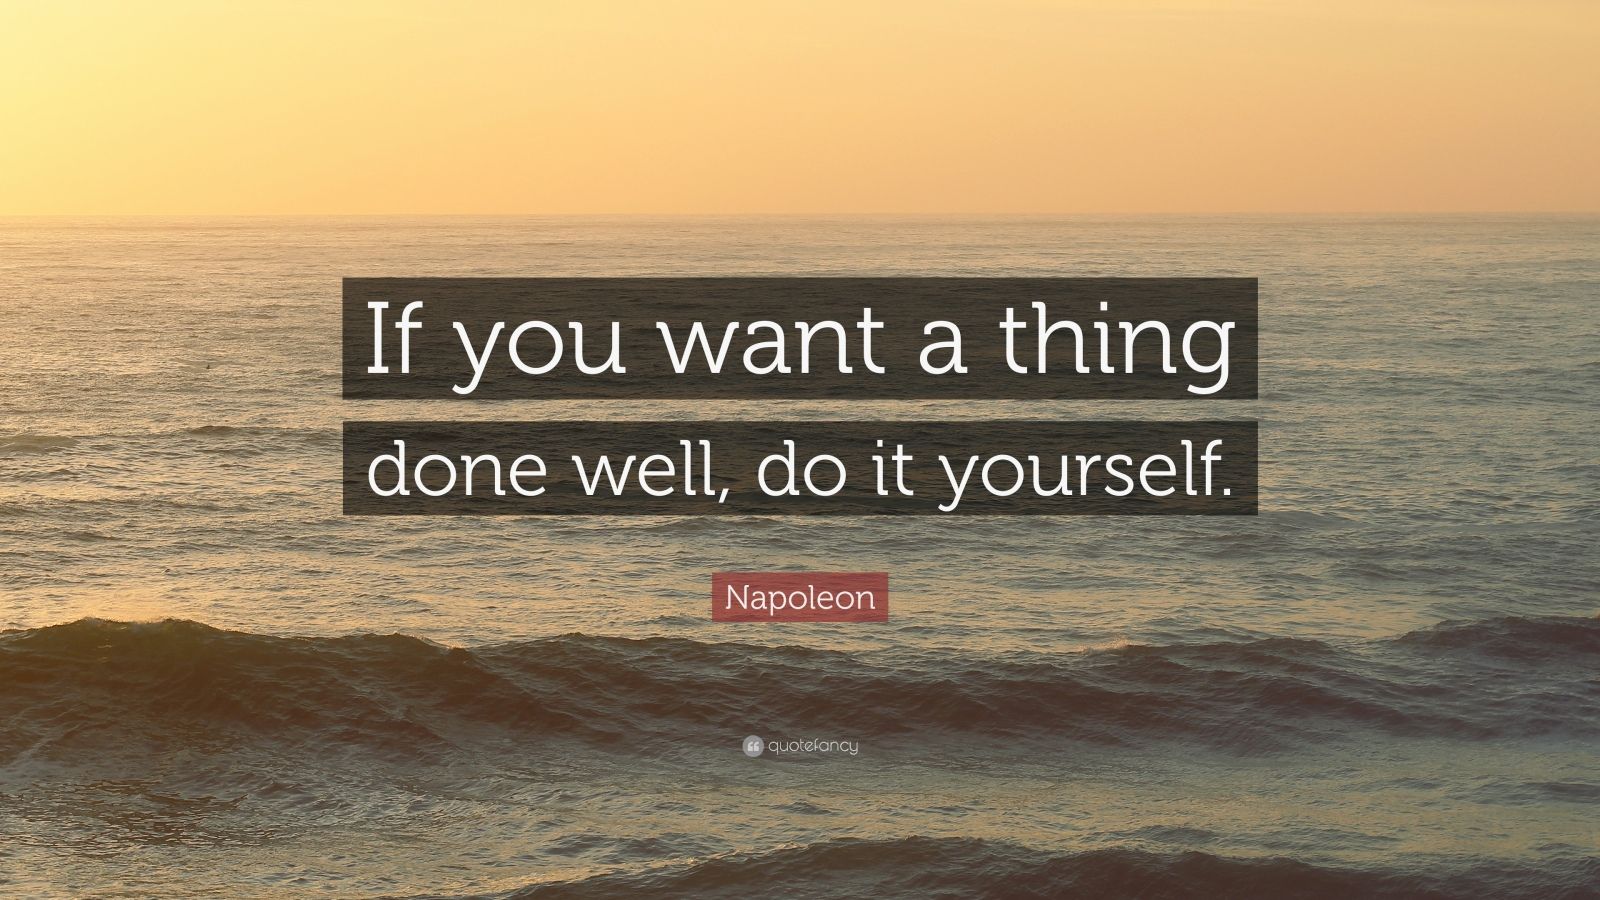 Napoleon Quote: "If you want a thing done well, do it yourself." (15 wallpapers) - Quotefancy